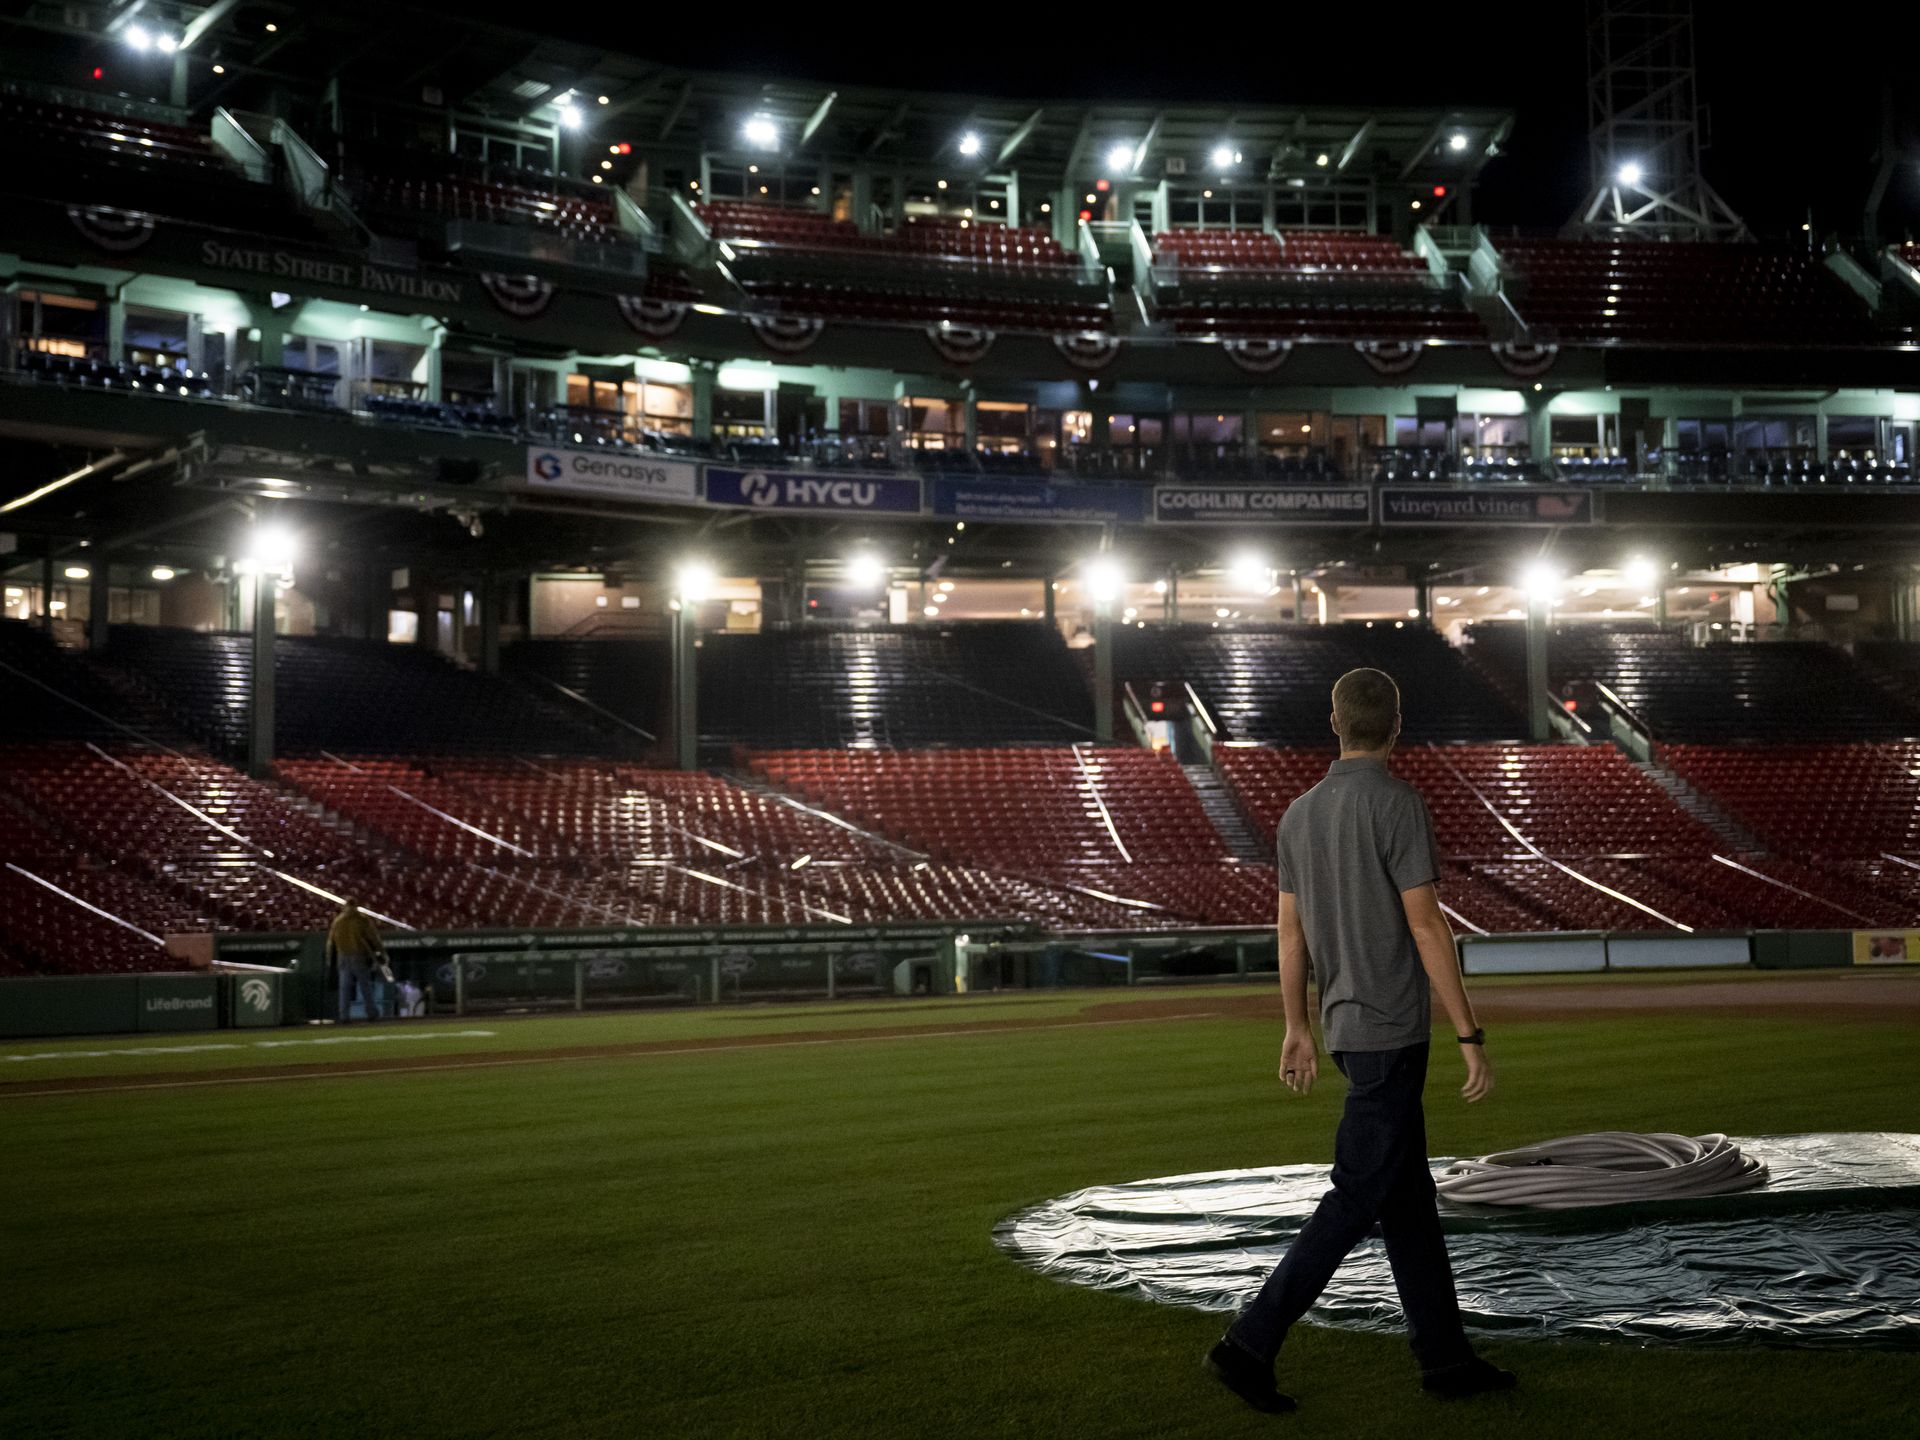 These are Fenway Park's theme nights - Axios Boston